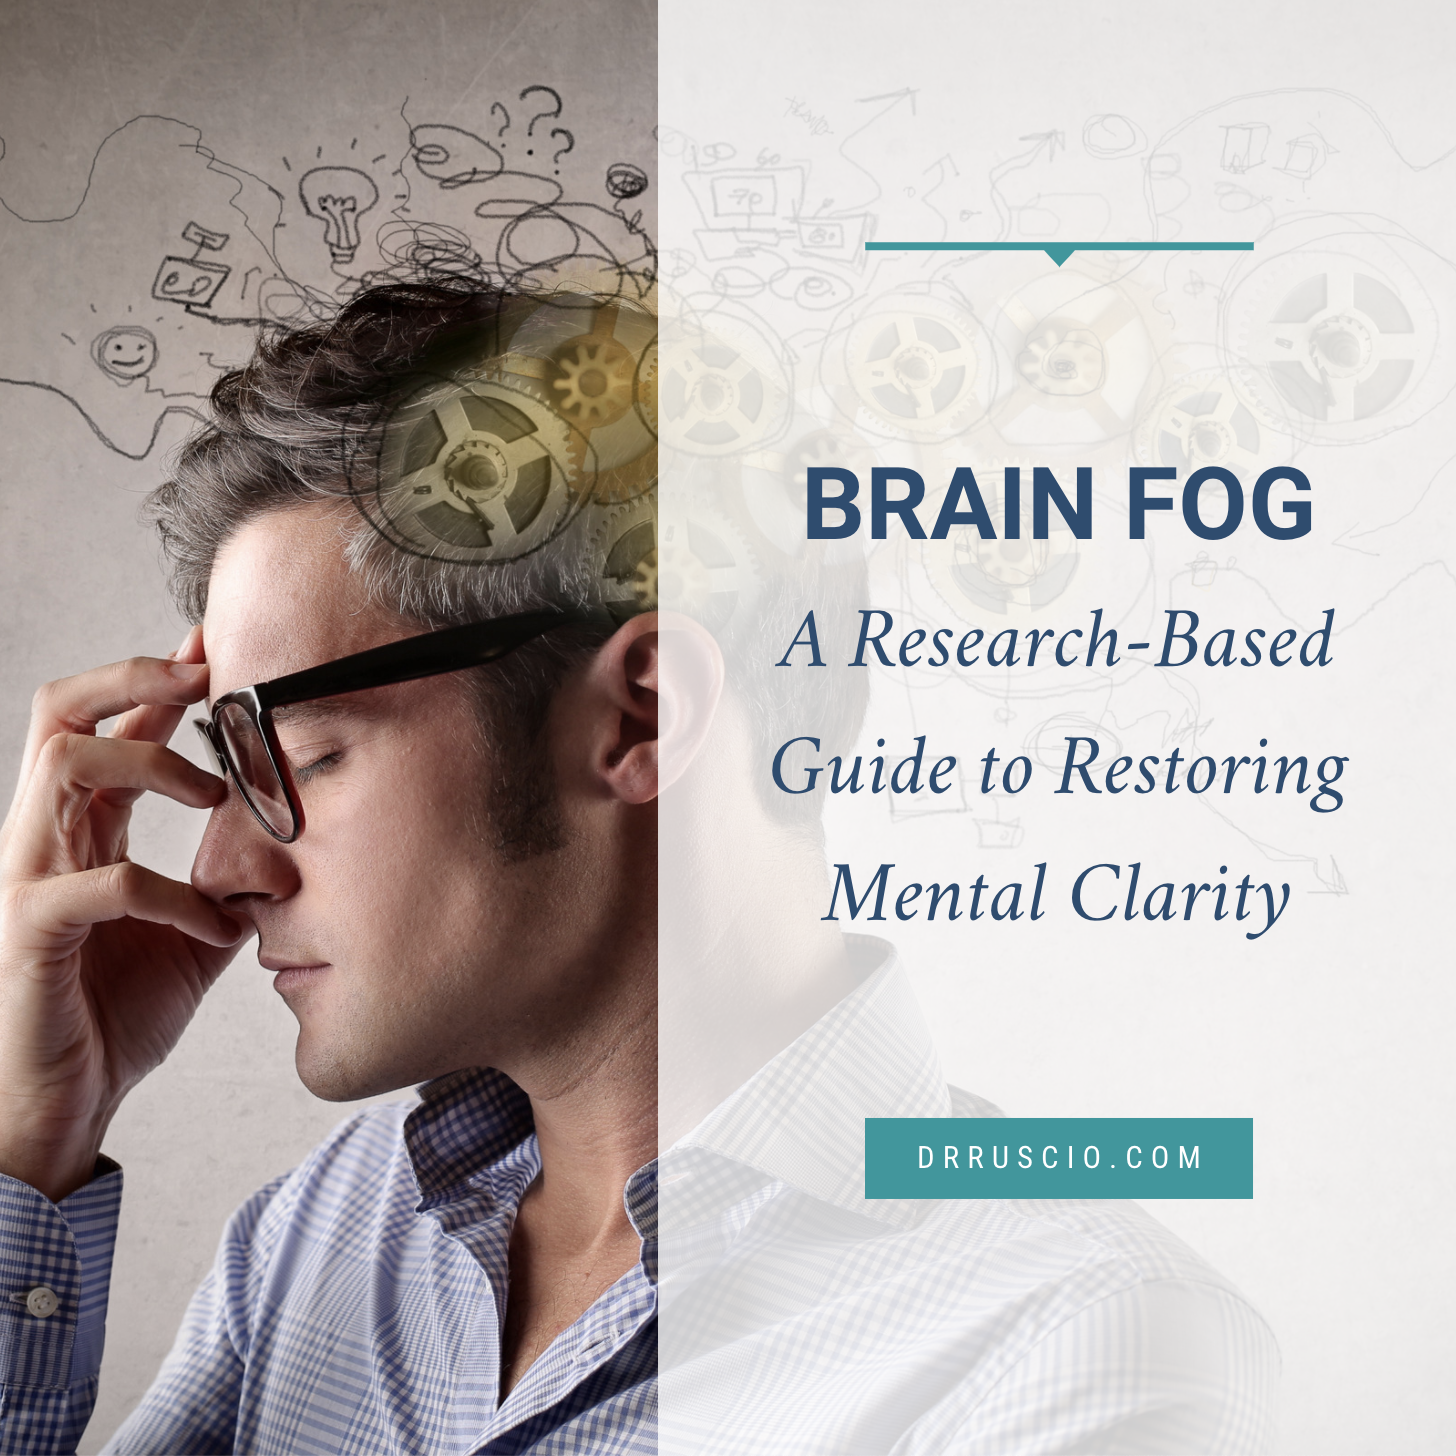 Brain Fog: A Research-Based Guide to Restoring Mental Clarity